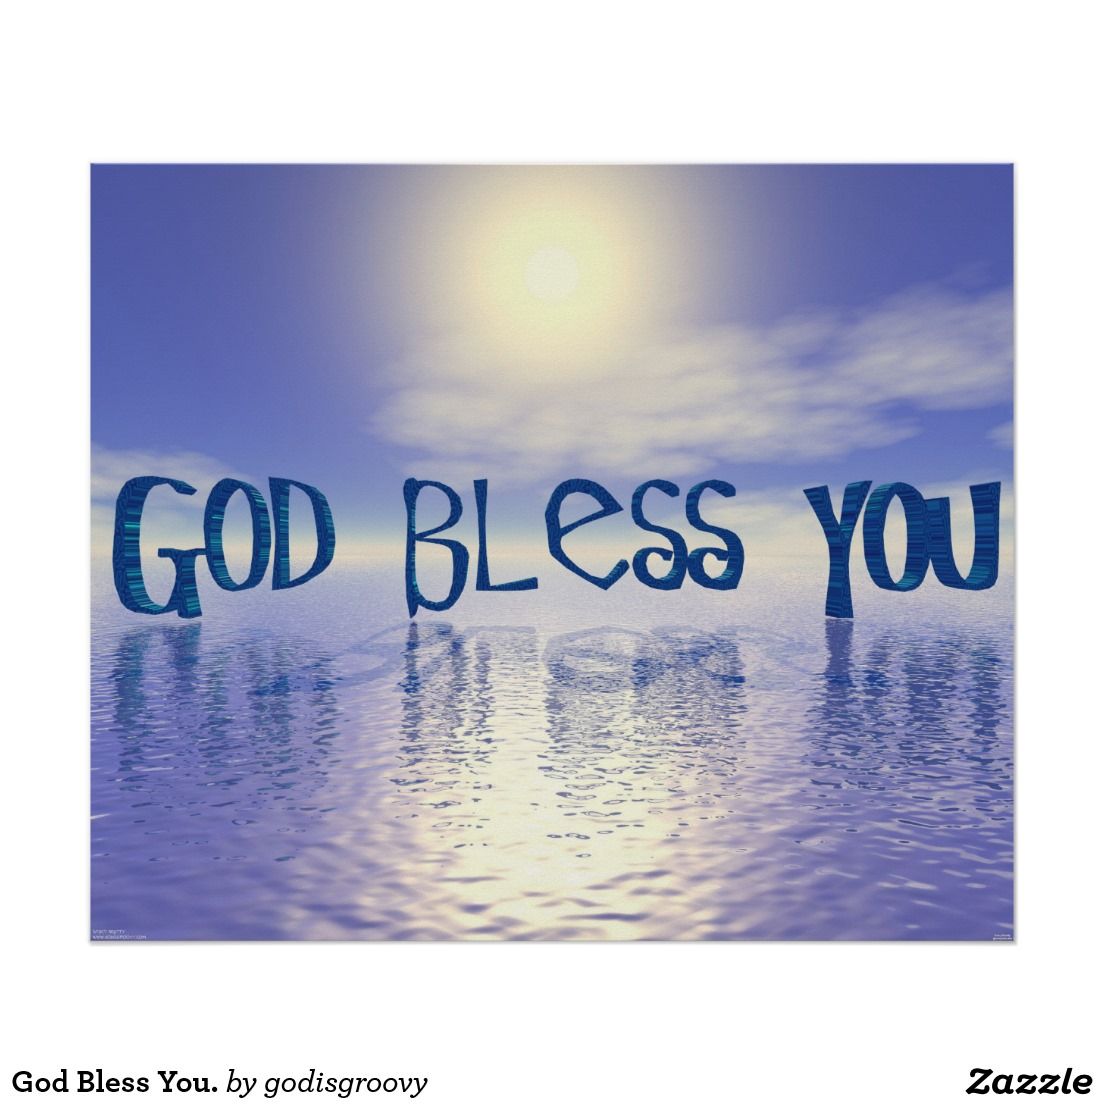 God Bless You. Poster. Zazzle.com. God bless you, God bless you quotes, Good night blessings